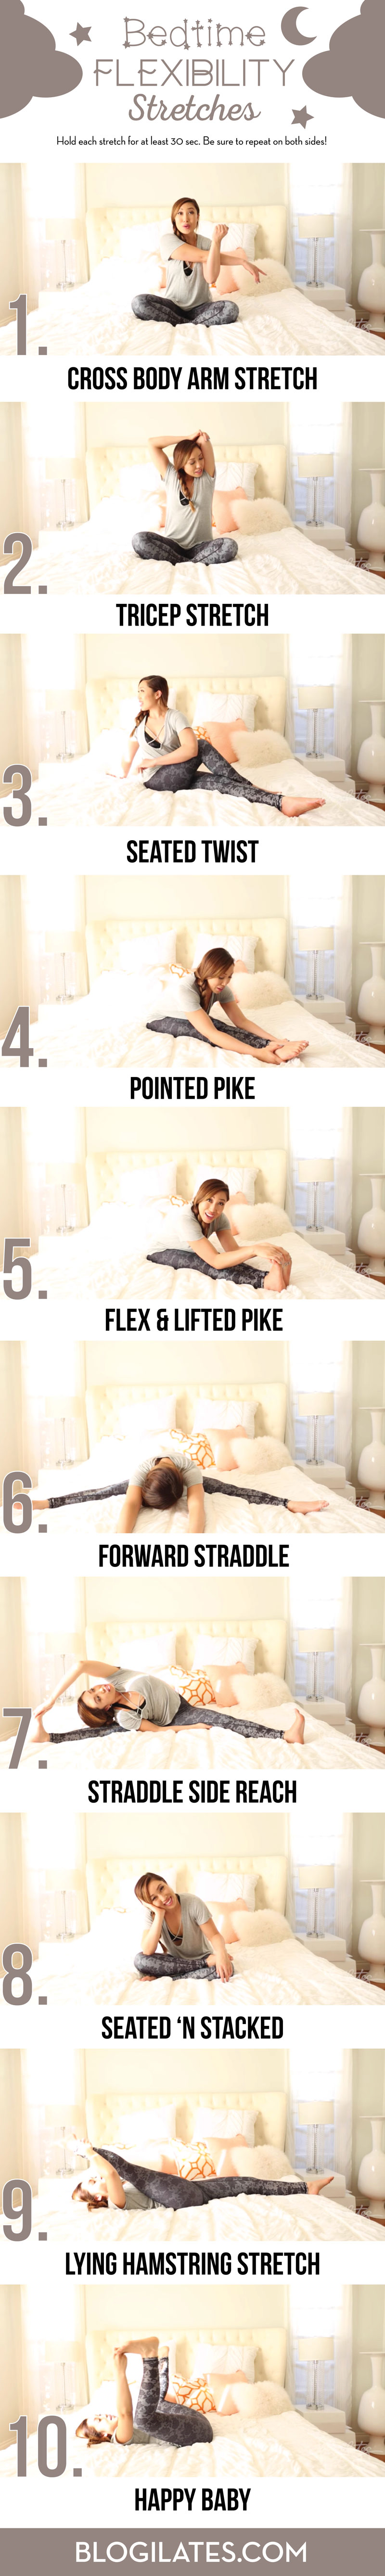 bed-stretches-final